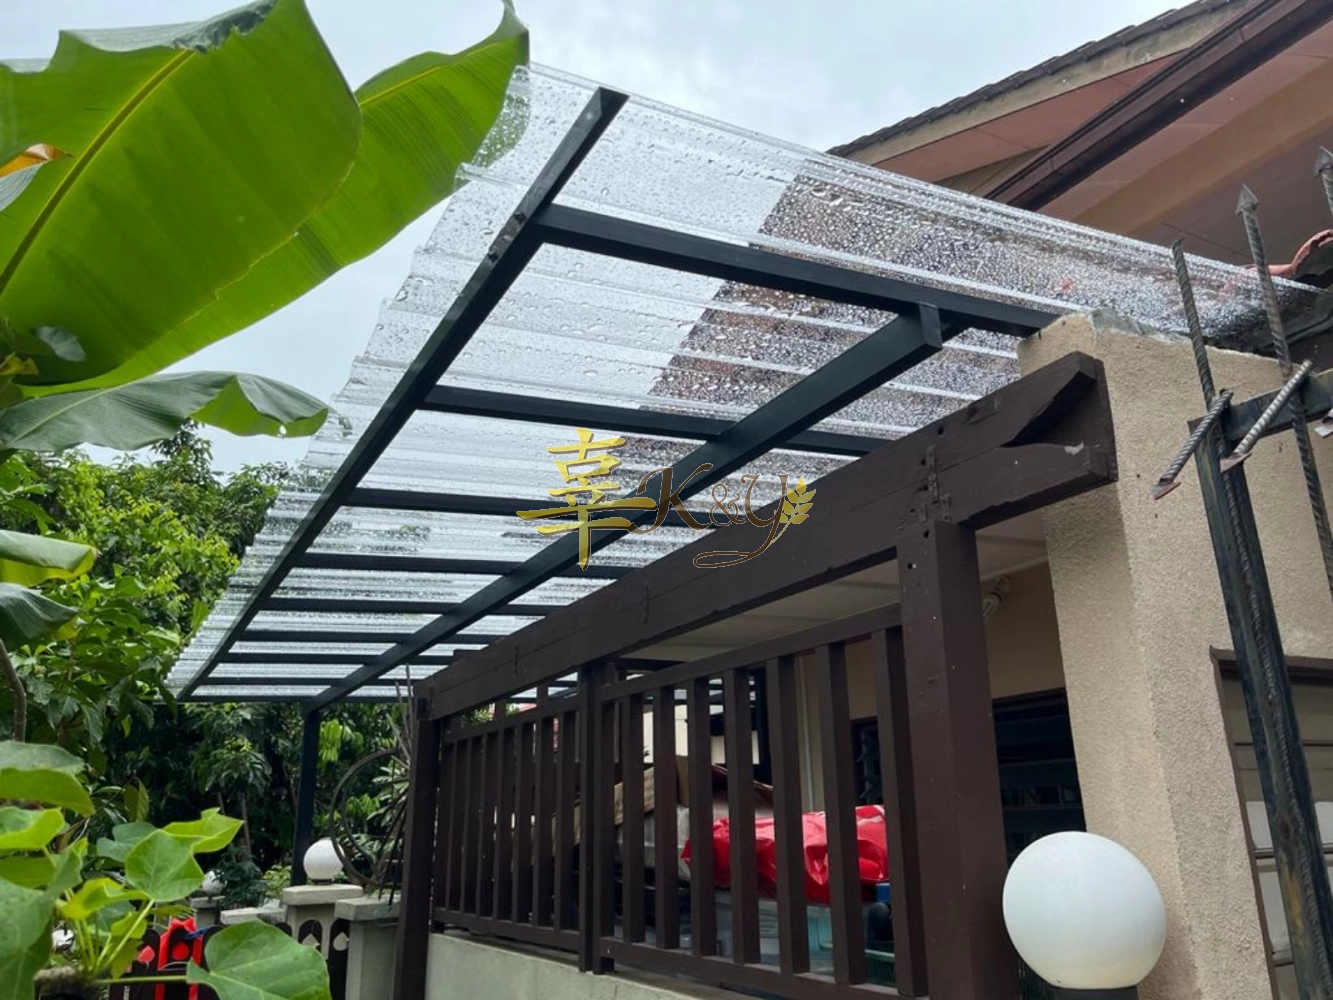 Mild Steel G28(0.35mm)Poly Glass(1.0mm) Awning- Frame Ms 1 1/2x1 1/2(1.0)Hollow ,Bean Ms 2x4(1.6)Hollow ,Pillar Ms 4x4(1.6)Hollow 